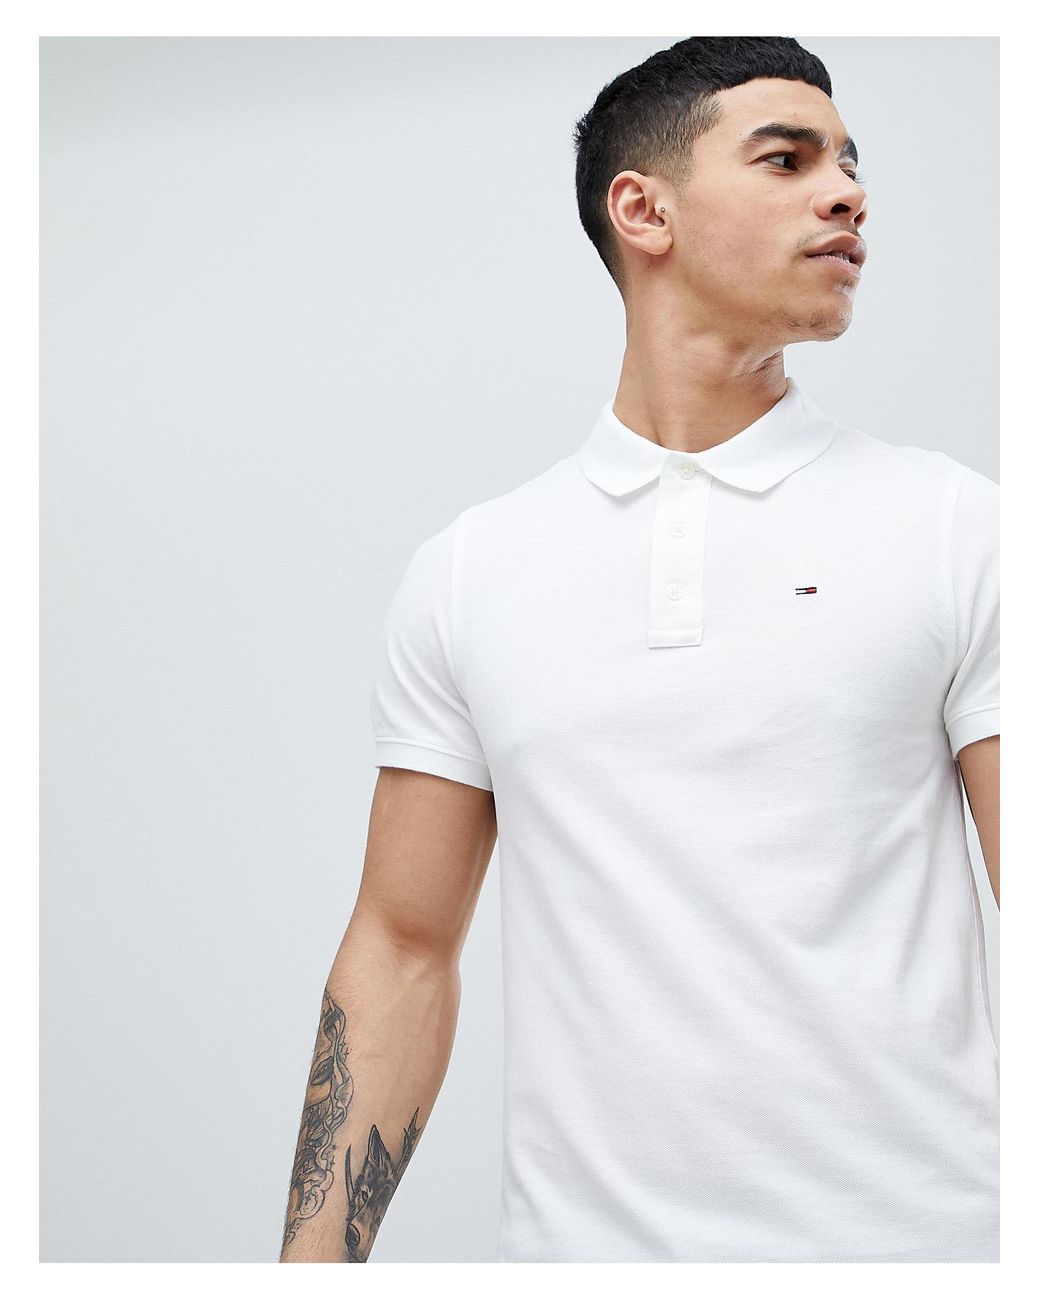 Tommy Hilfiger Denim Pique Polo Shirt in White for Men - Save 24% - Lyst